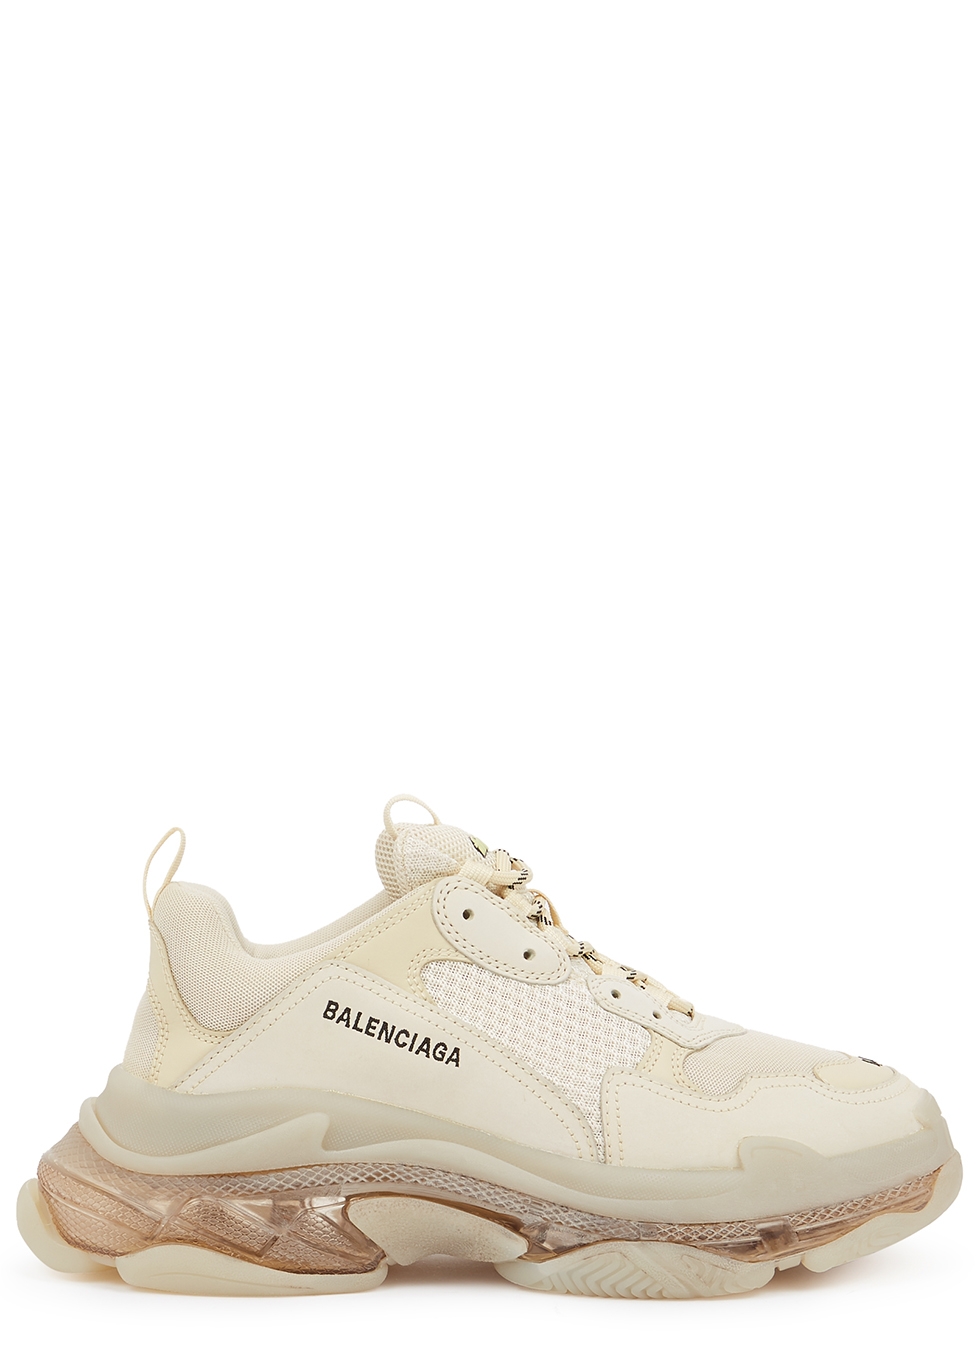 Genuine Balenciaga Triple S trainers in UK size 5 These a a